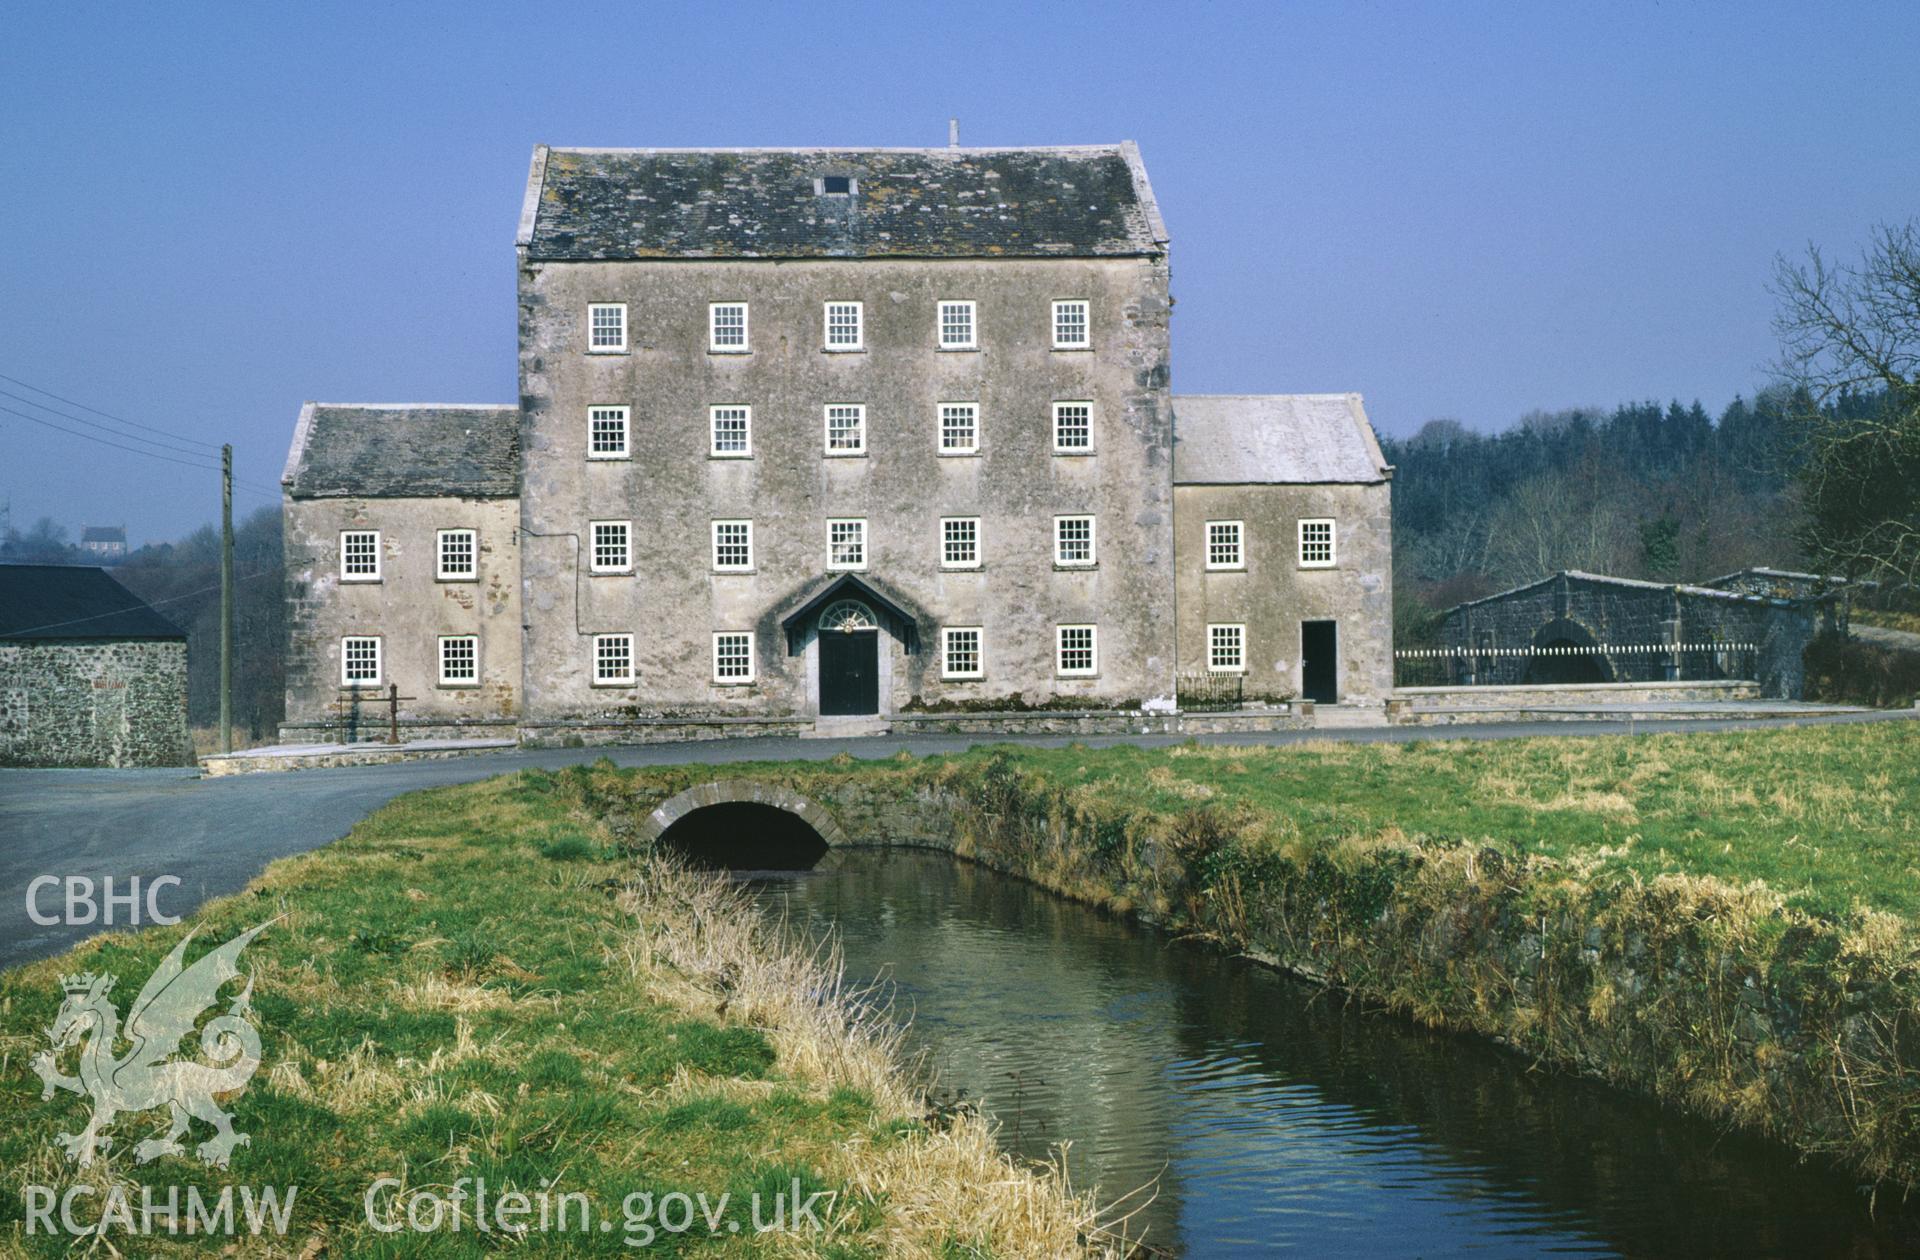 35mm colour slide showing Blackpool Mill, Pembrokshire by Dylan Roberts.